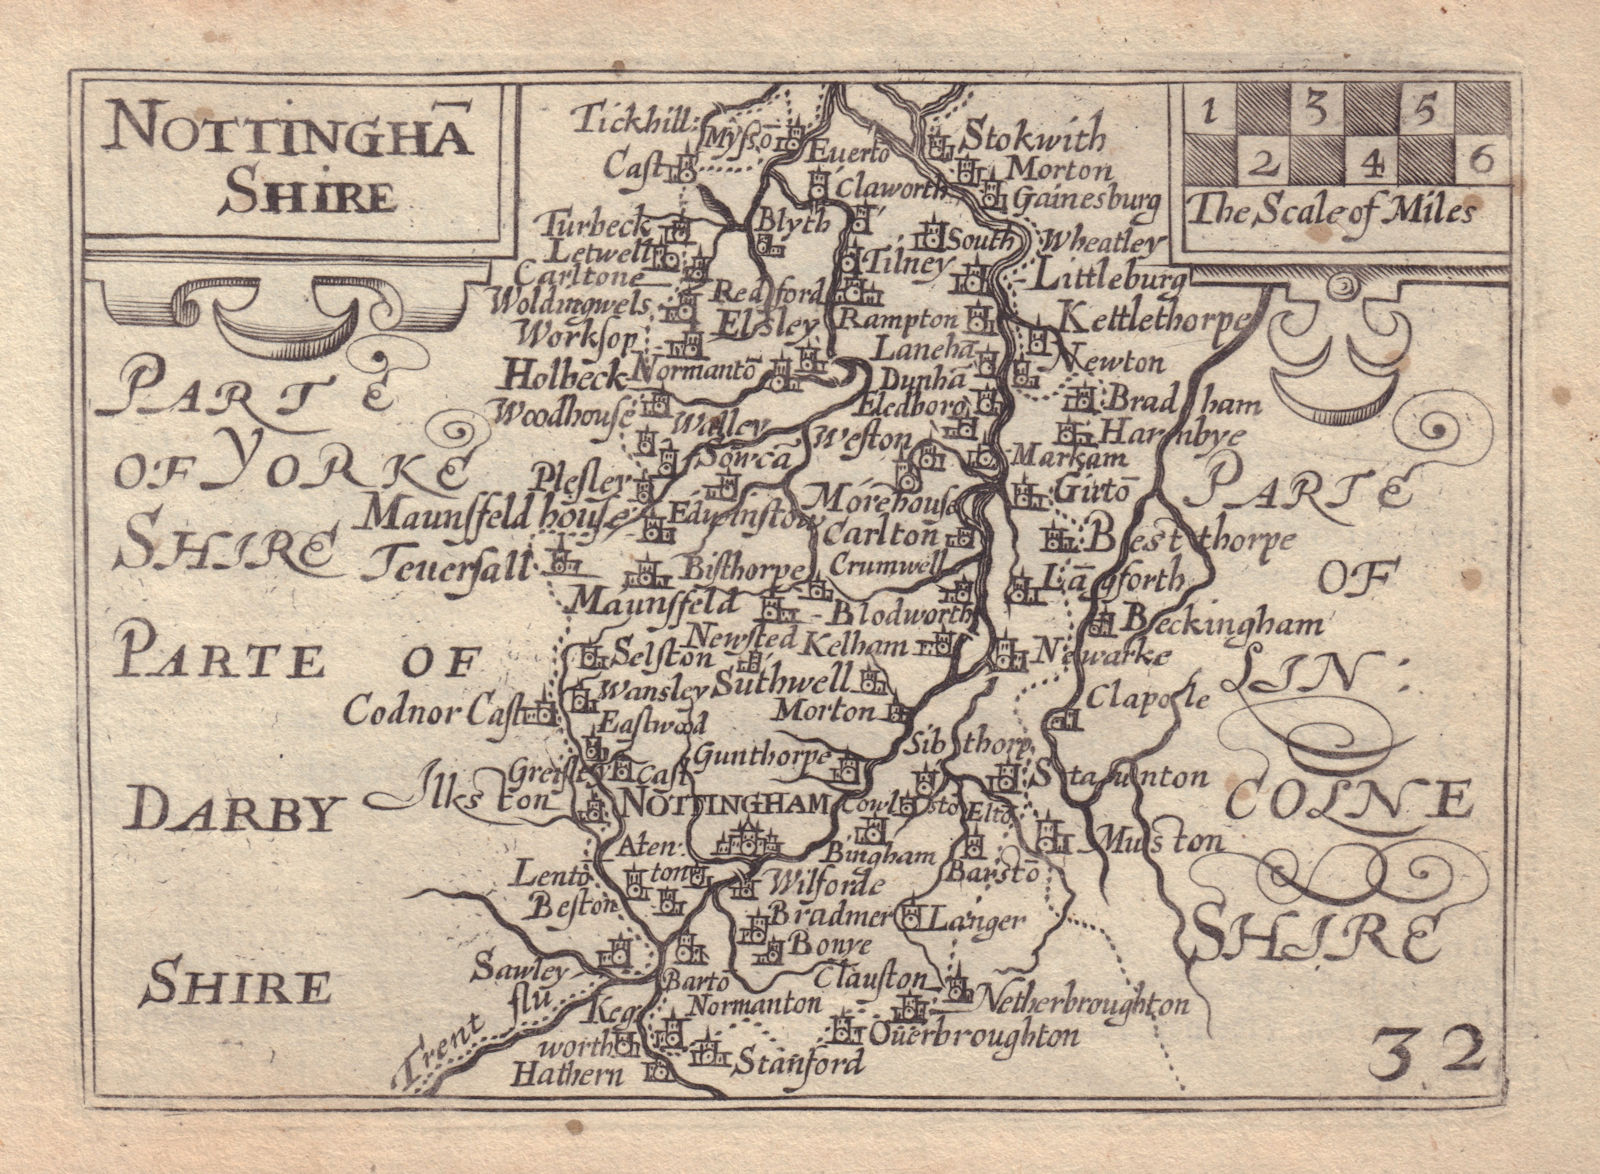 Nottingha Shire by Keere. "Speed miniature" Nottinghamshire county map 1632